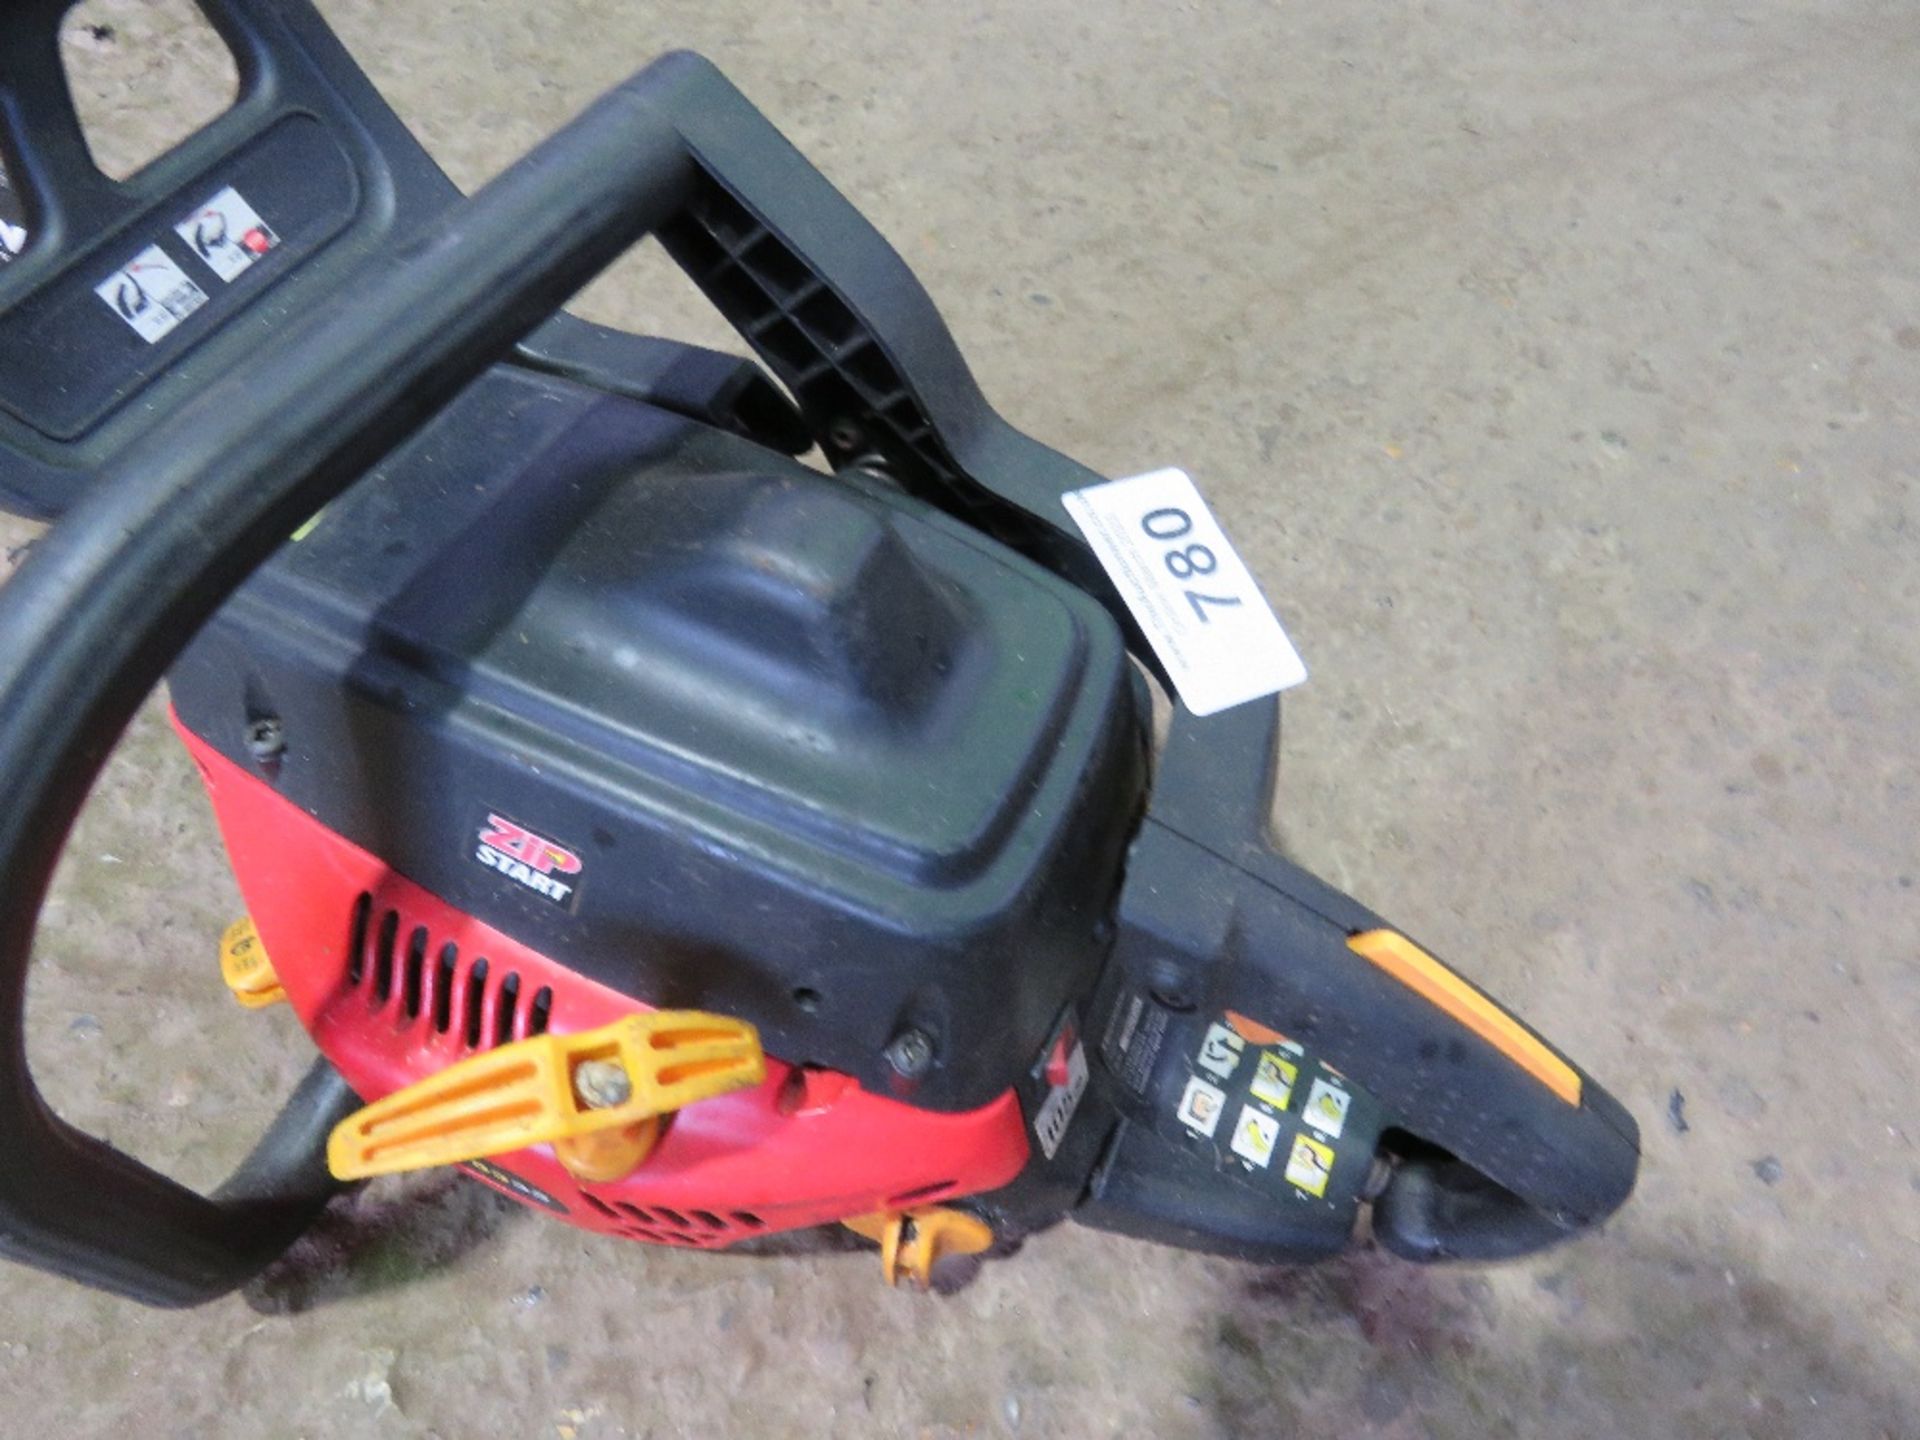 HOMELITE PETROL ENGINED CHAINSAW. DIRECT FROM WORKSHOP WHERE OWNER RETIRING. THIS LOT IS SOLD UN - Image 3 of 3